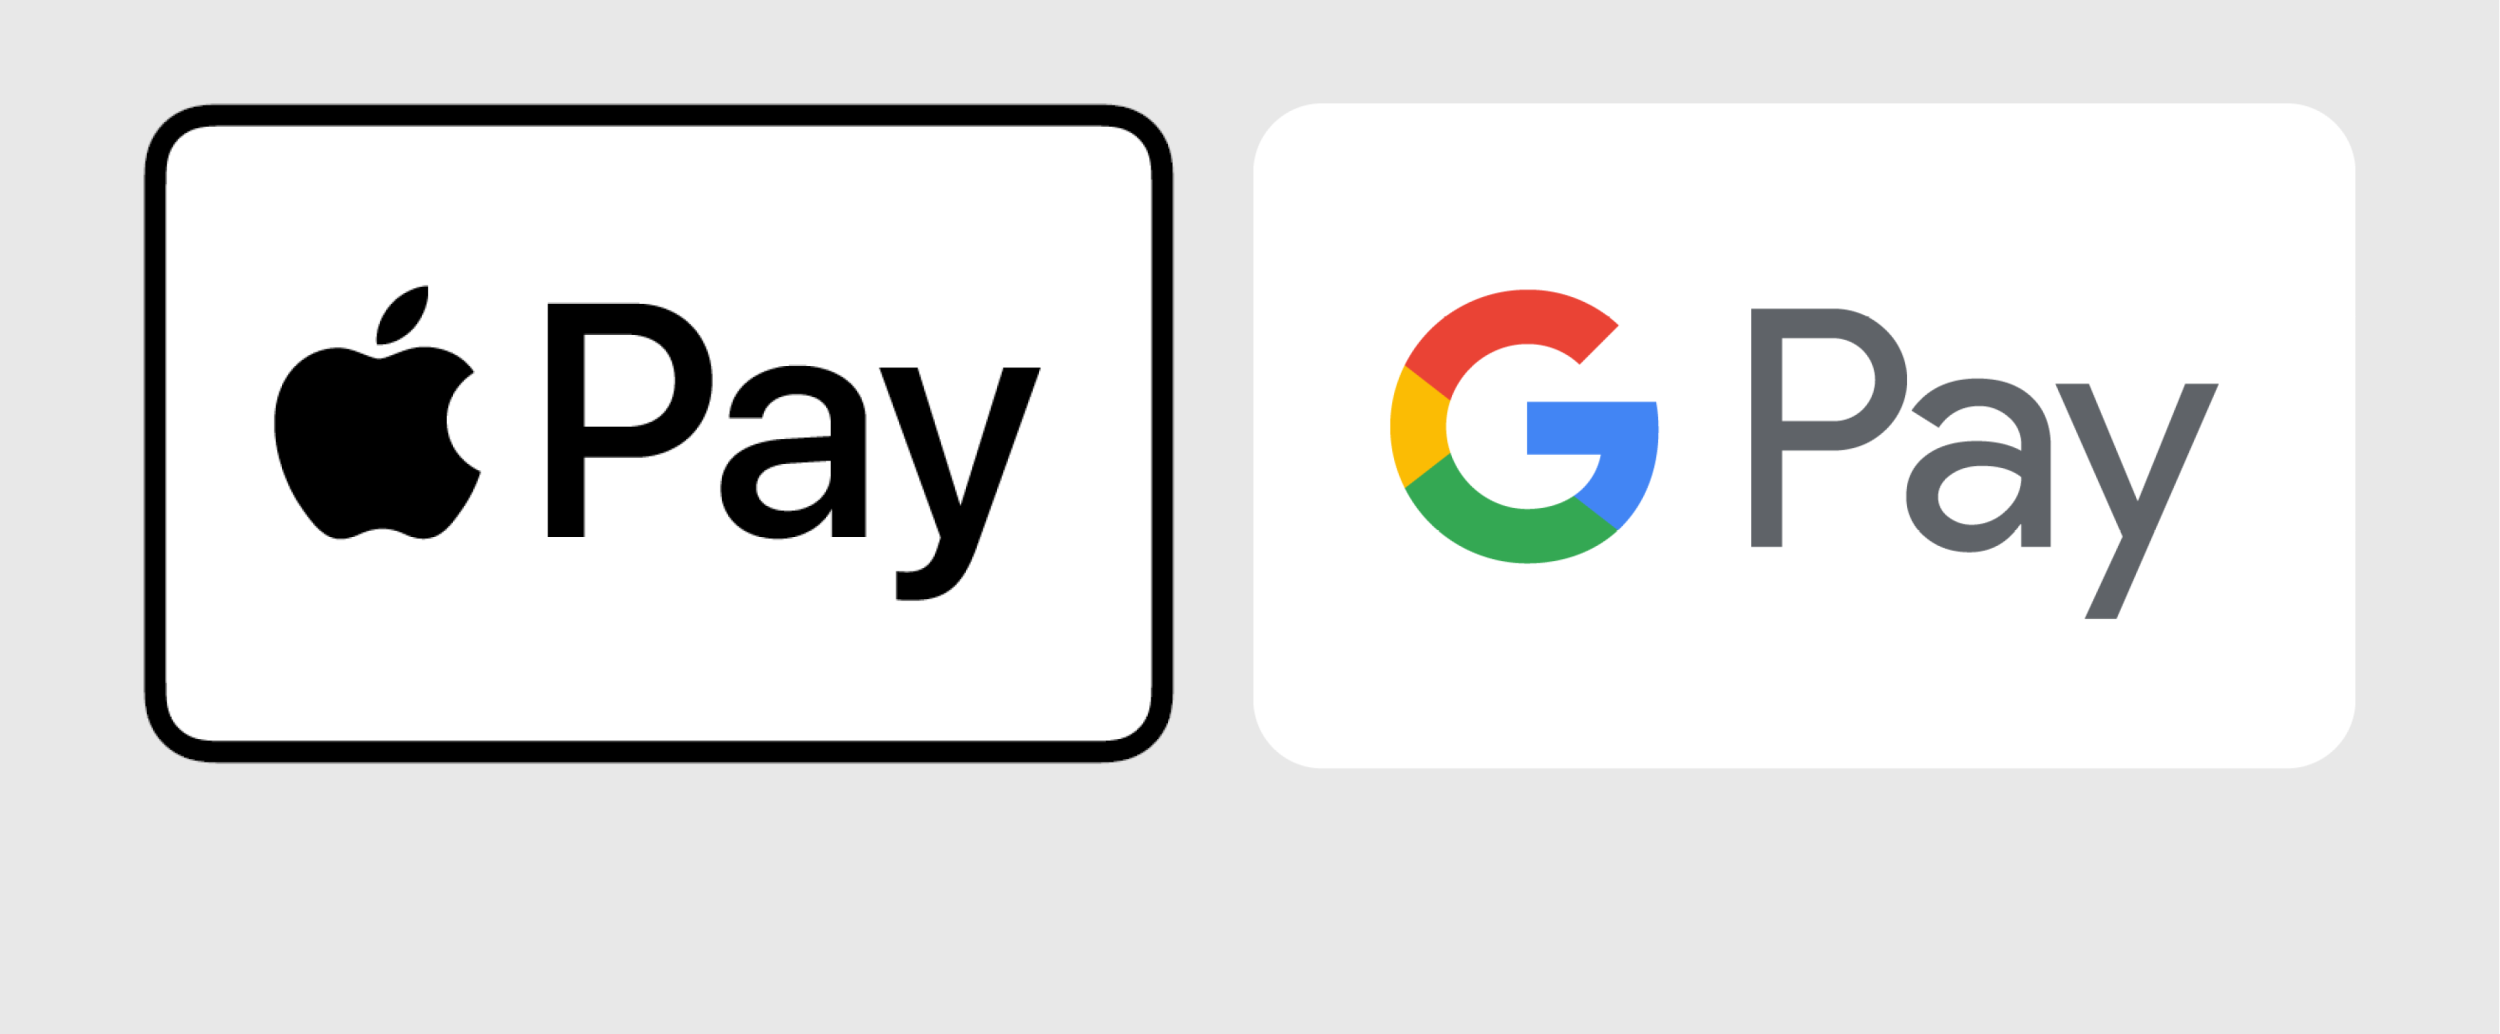 Google Pay Promo Code: Get $25 Free - wide 3